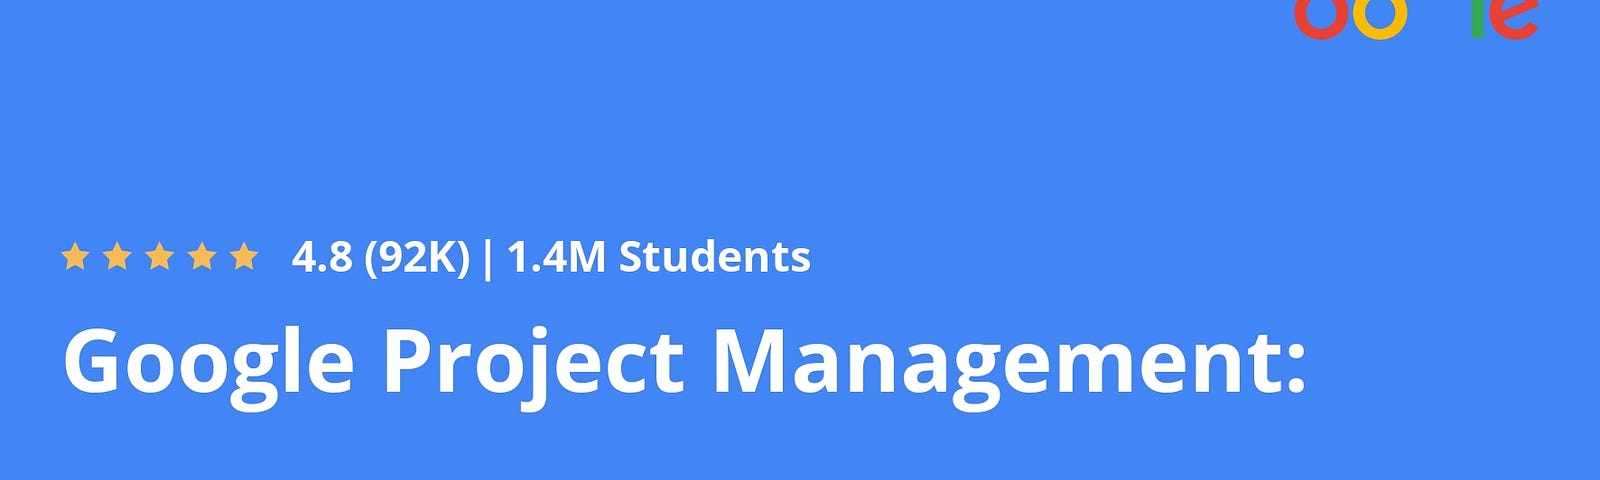 Is Google’s Project Management: Professional Certificate on Coursera worth it? Review